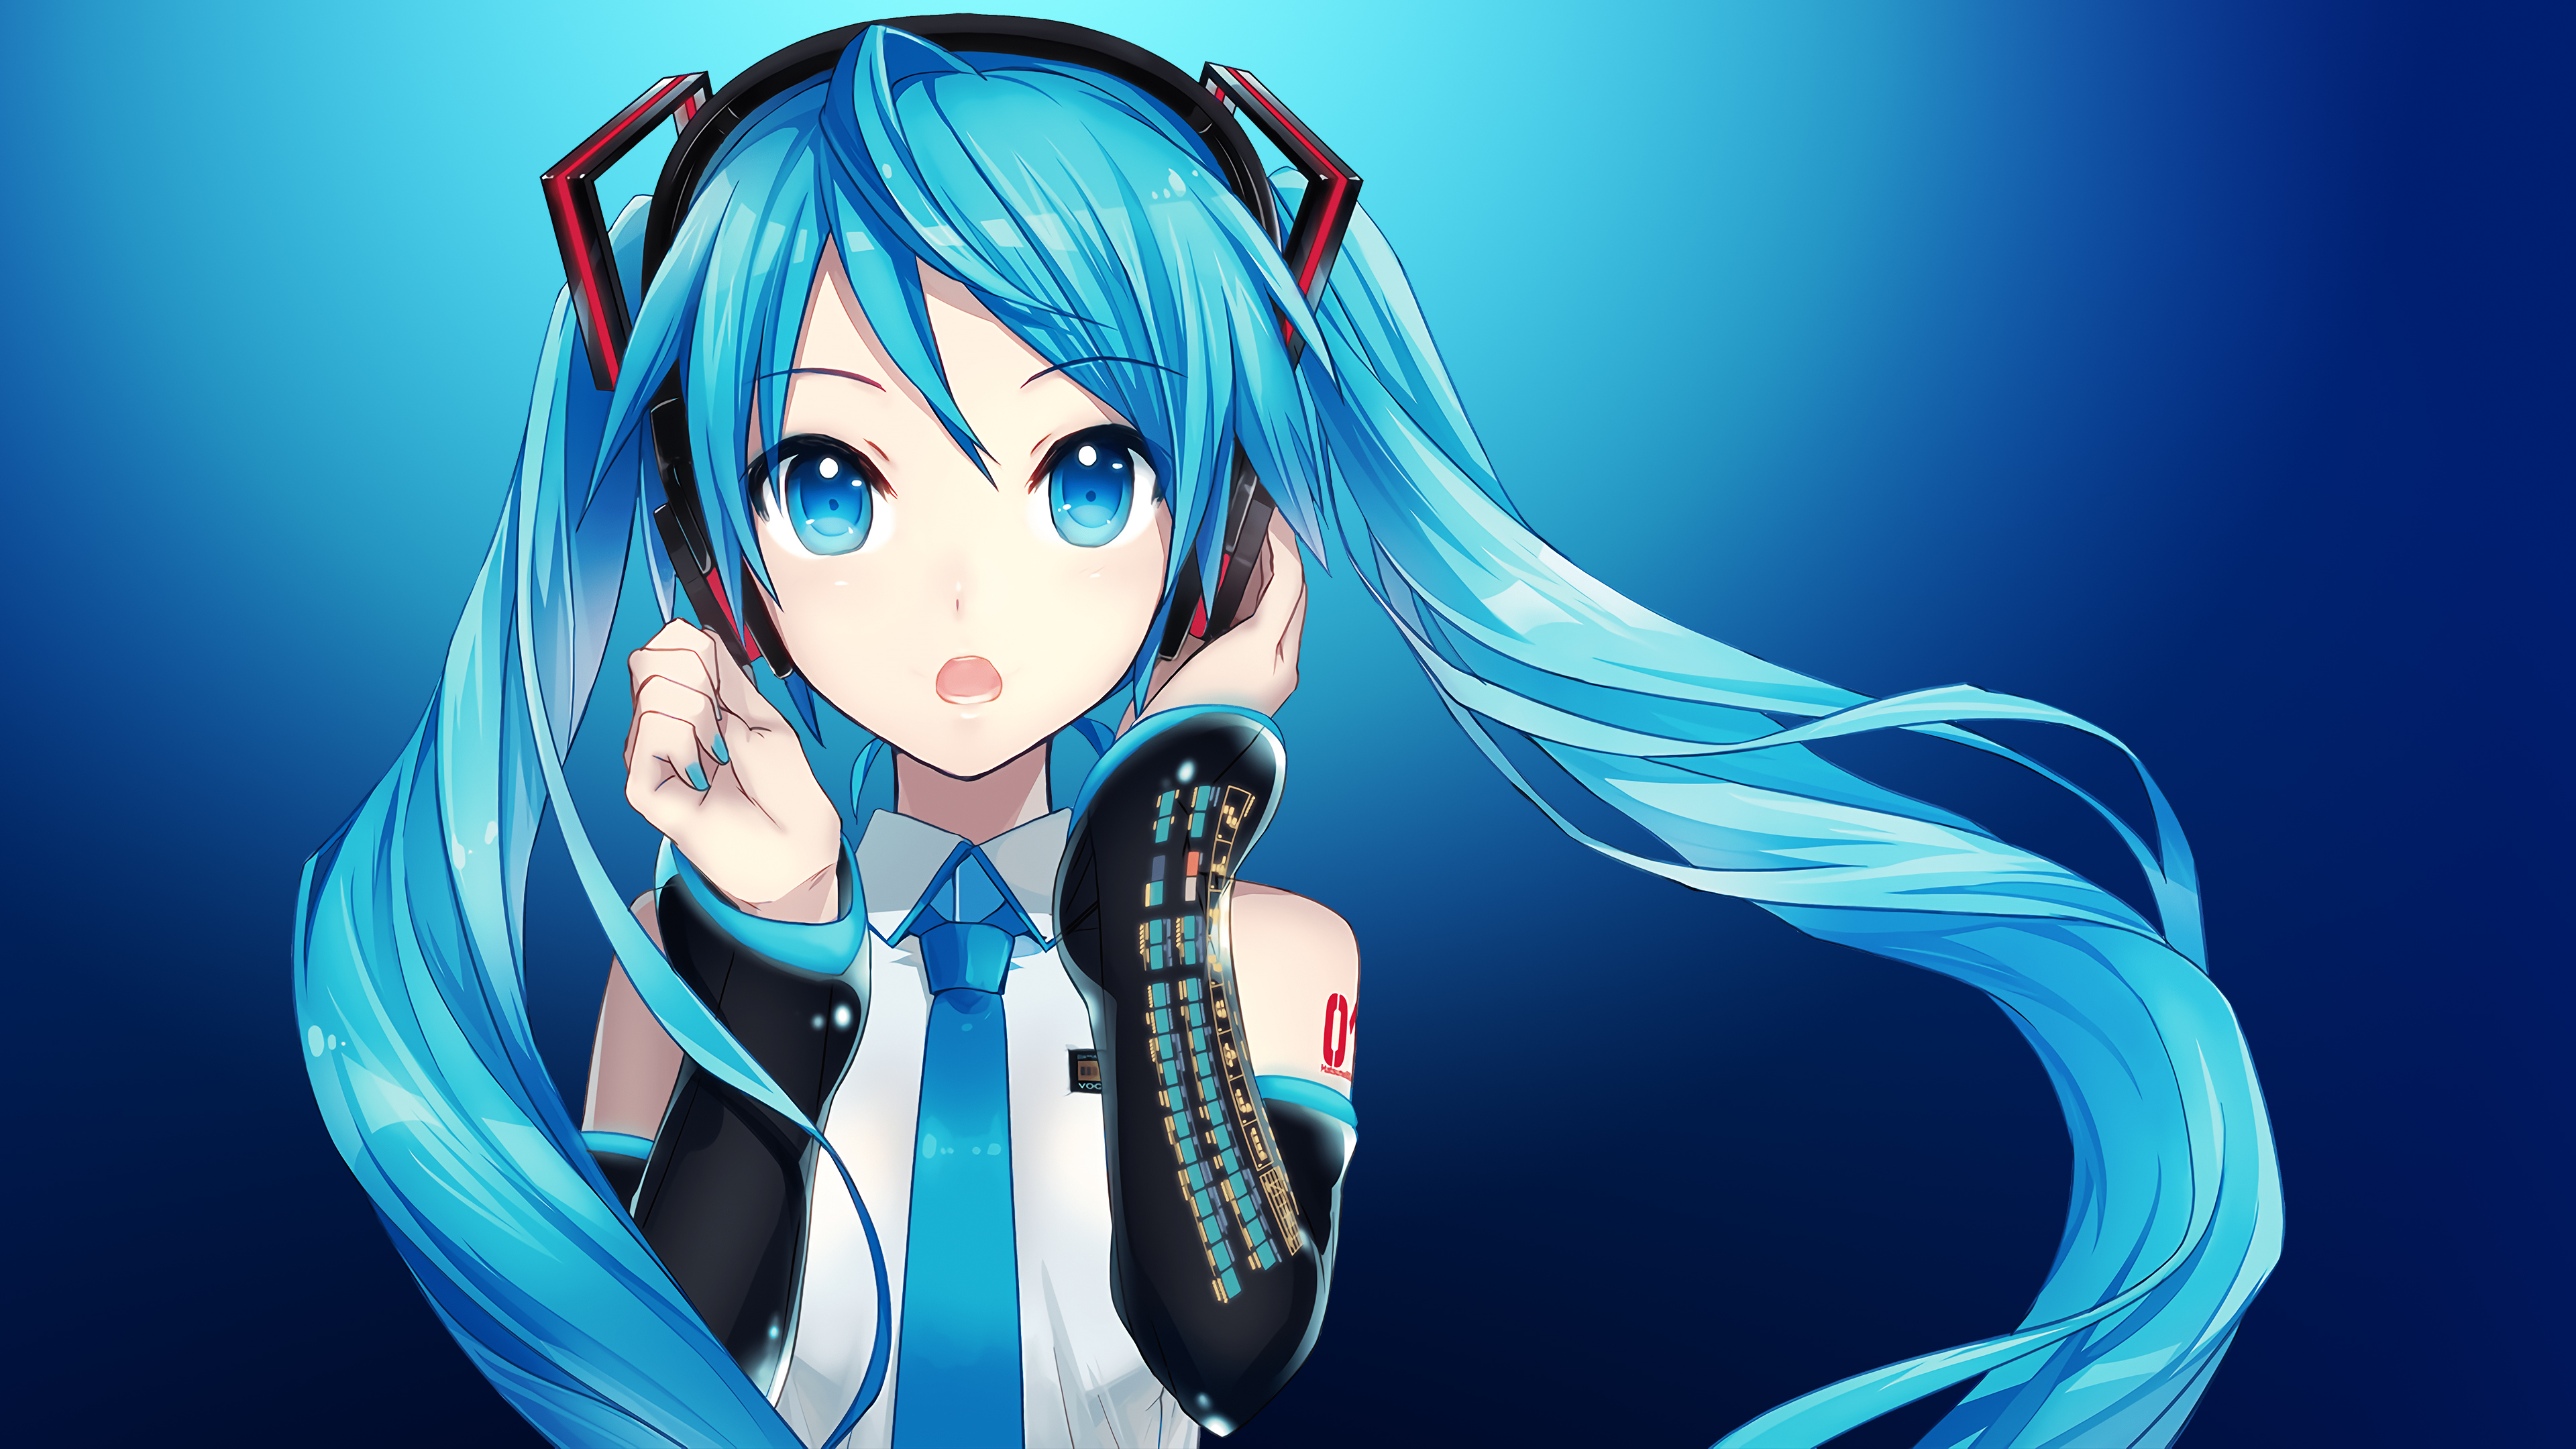 Hatsune miku art k hd anime k wallpapers images backgrounds photos and pictures